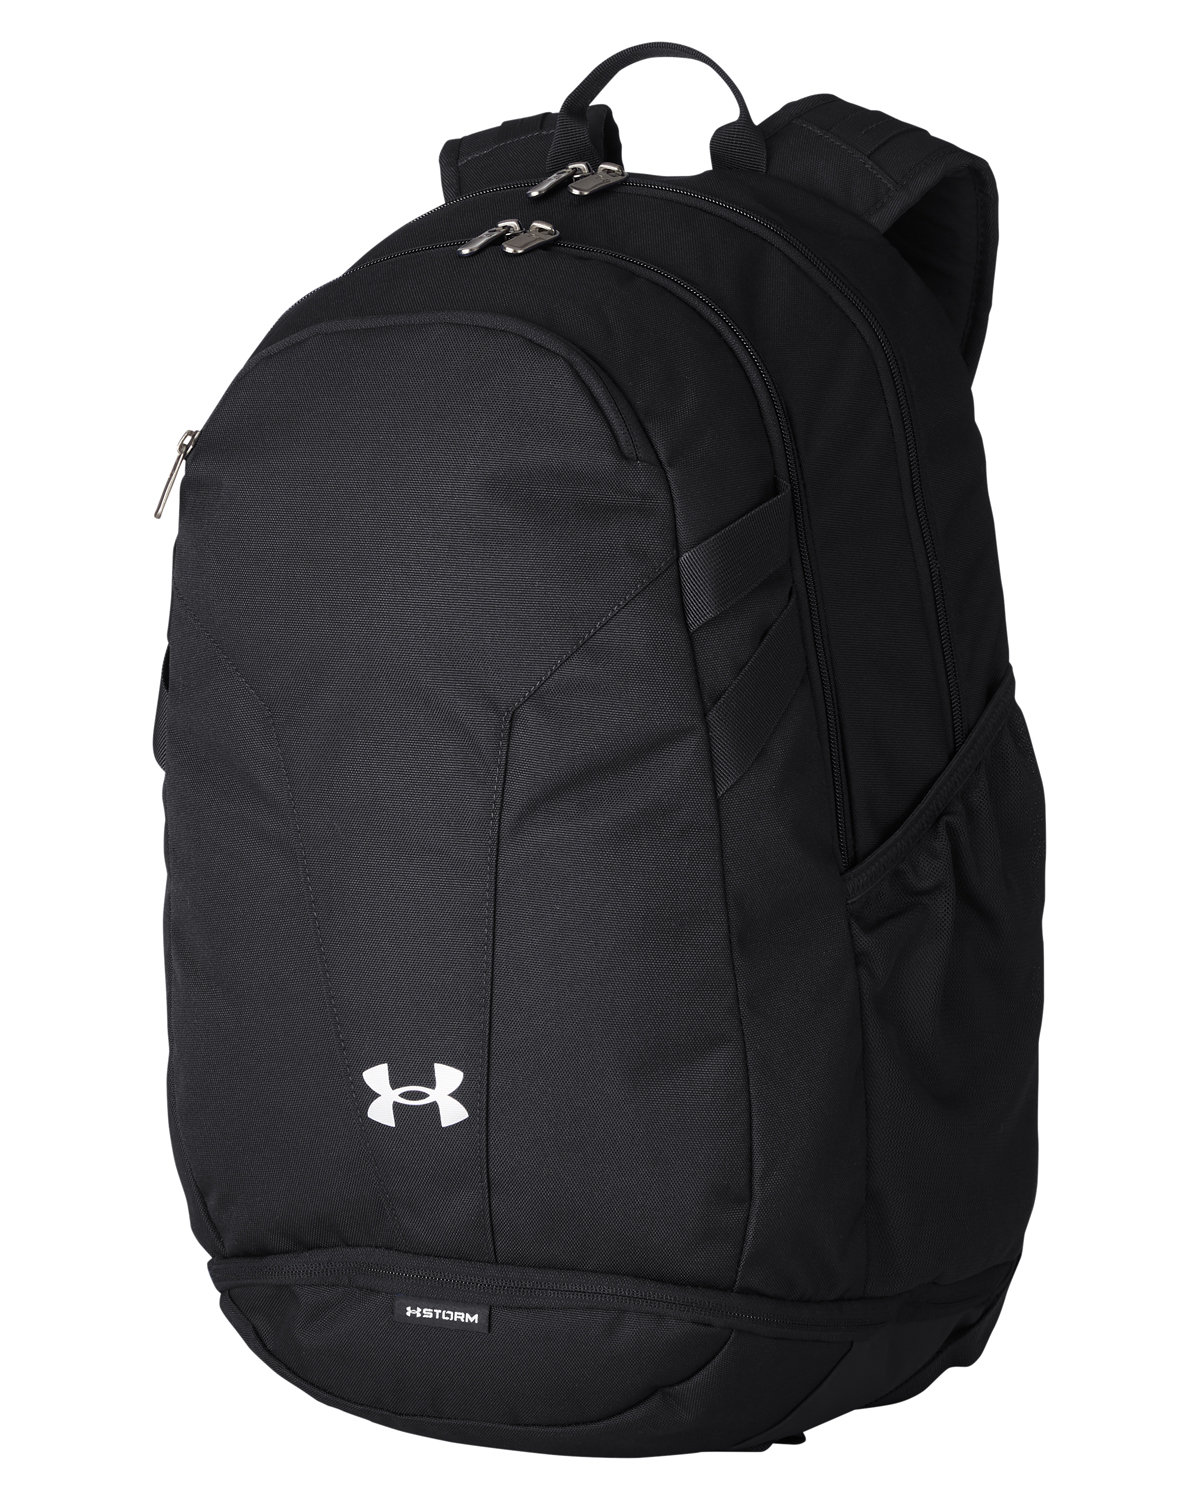 Under Armour Hustle 5.0 TEAM Backpack | US Generic Non-Priced